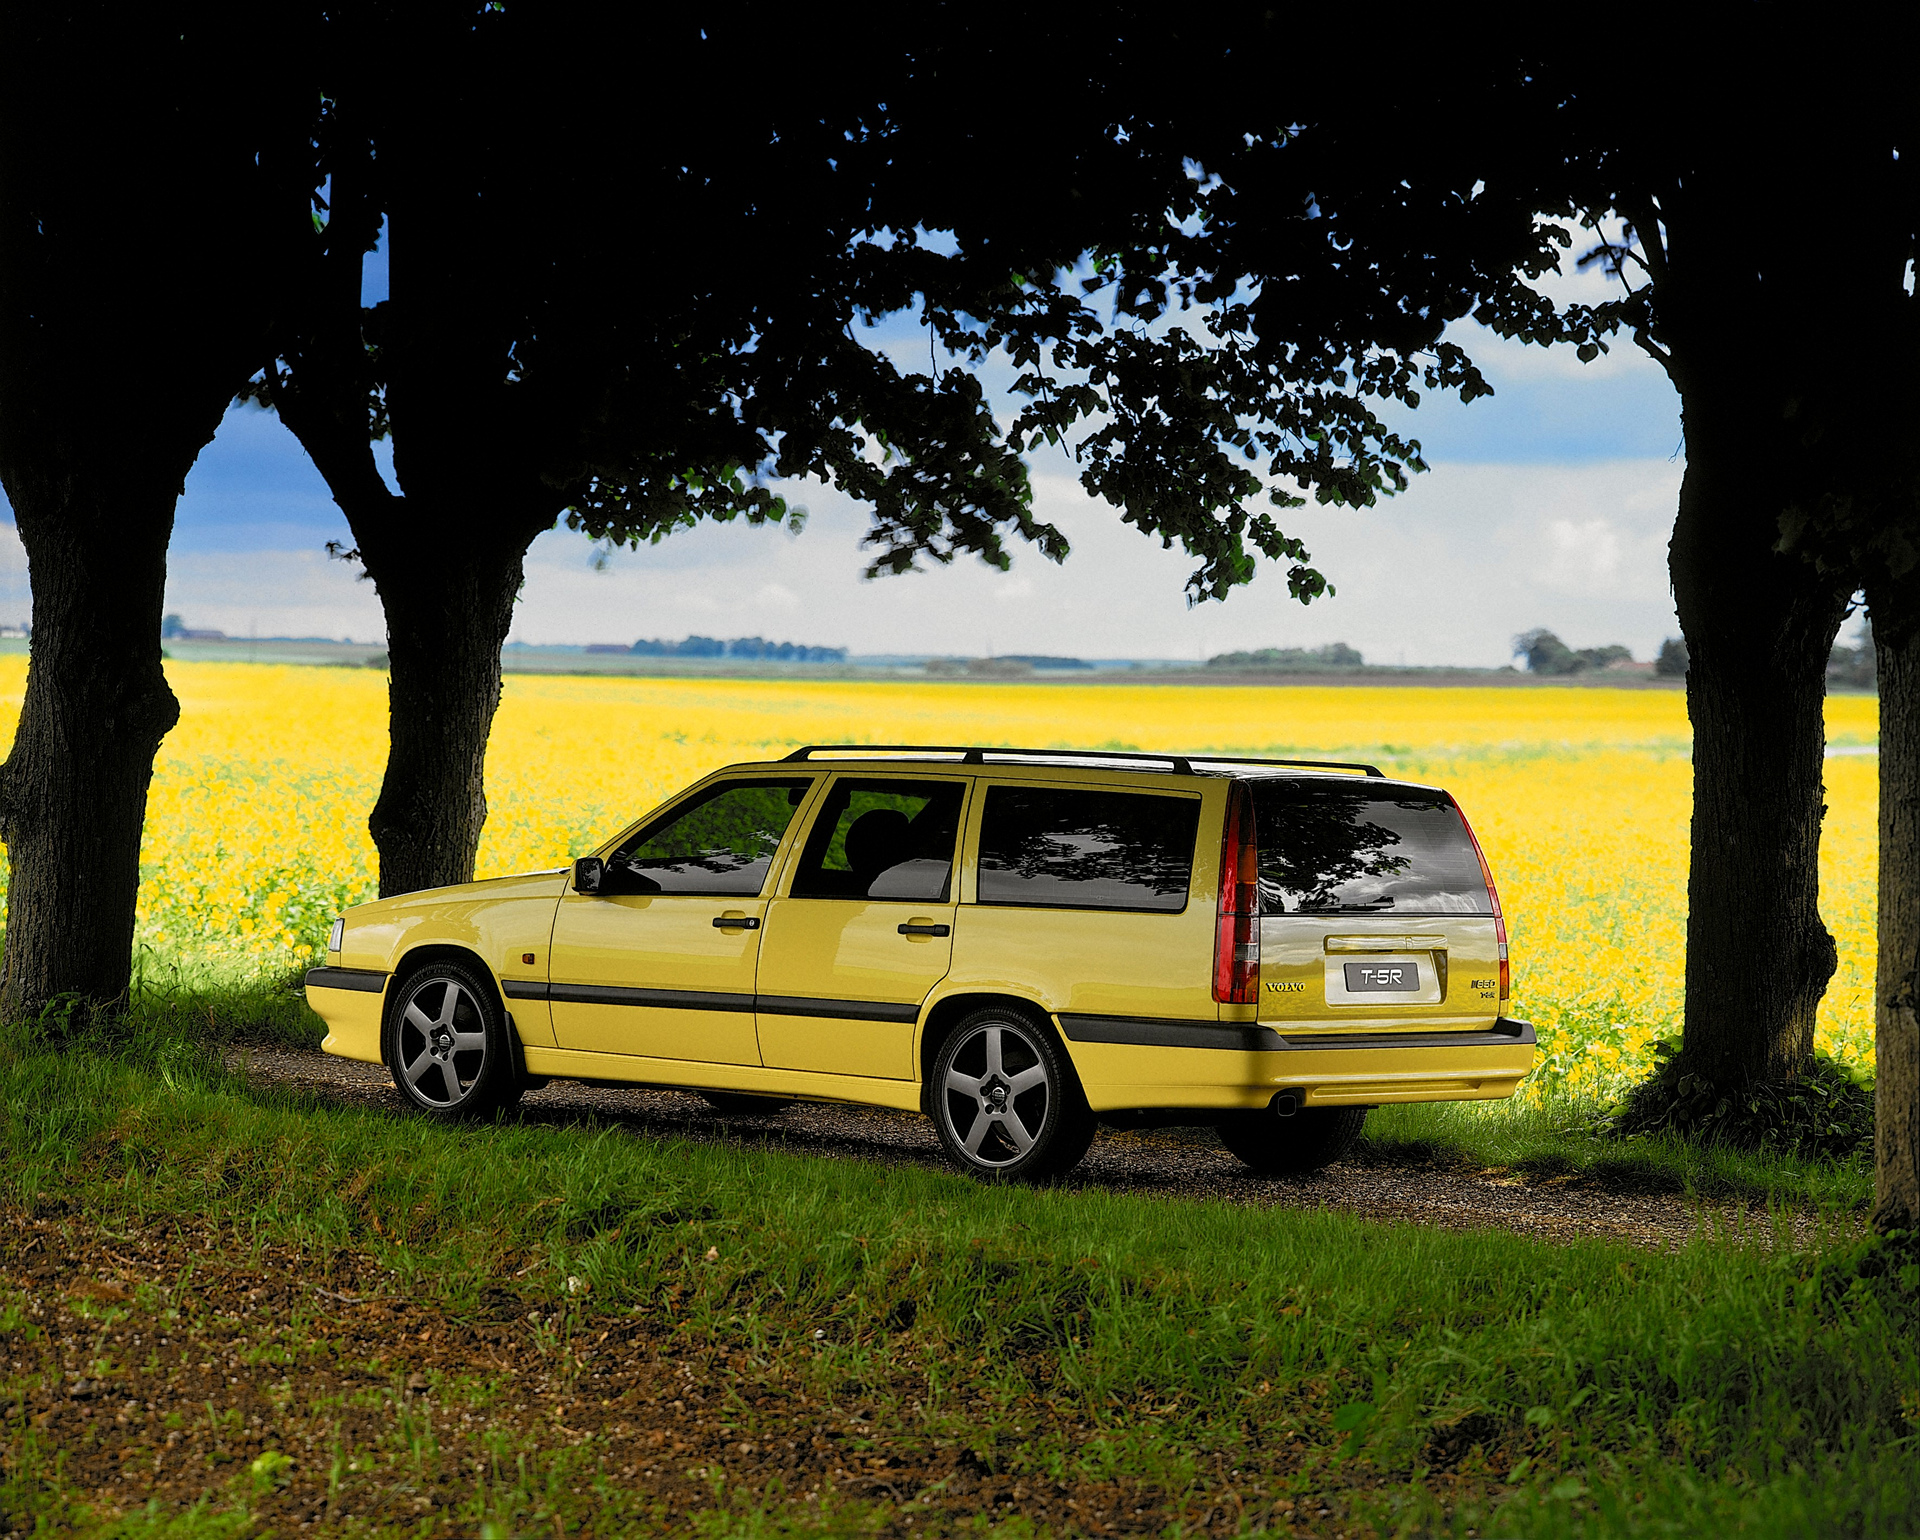 Volvo 850 T5 R © Zhejiang Geely Holding Group Co., Ltd